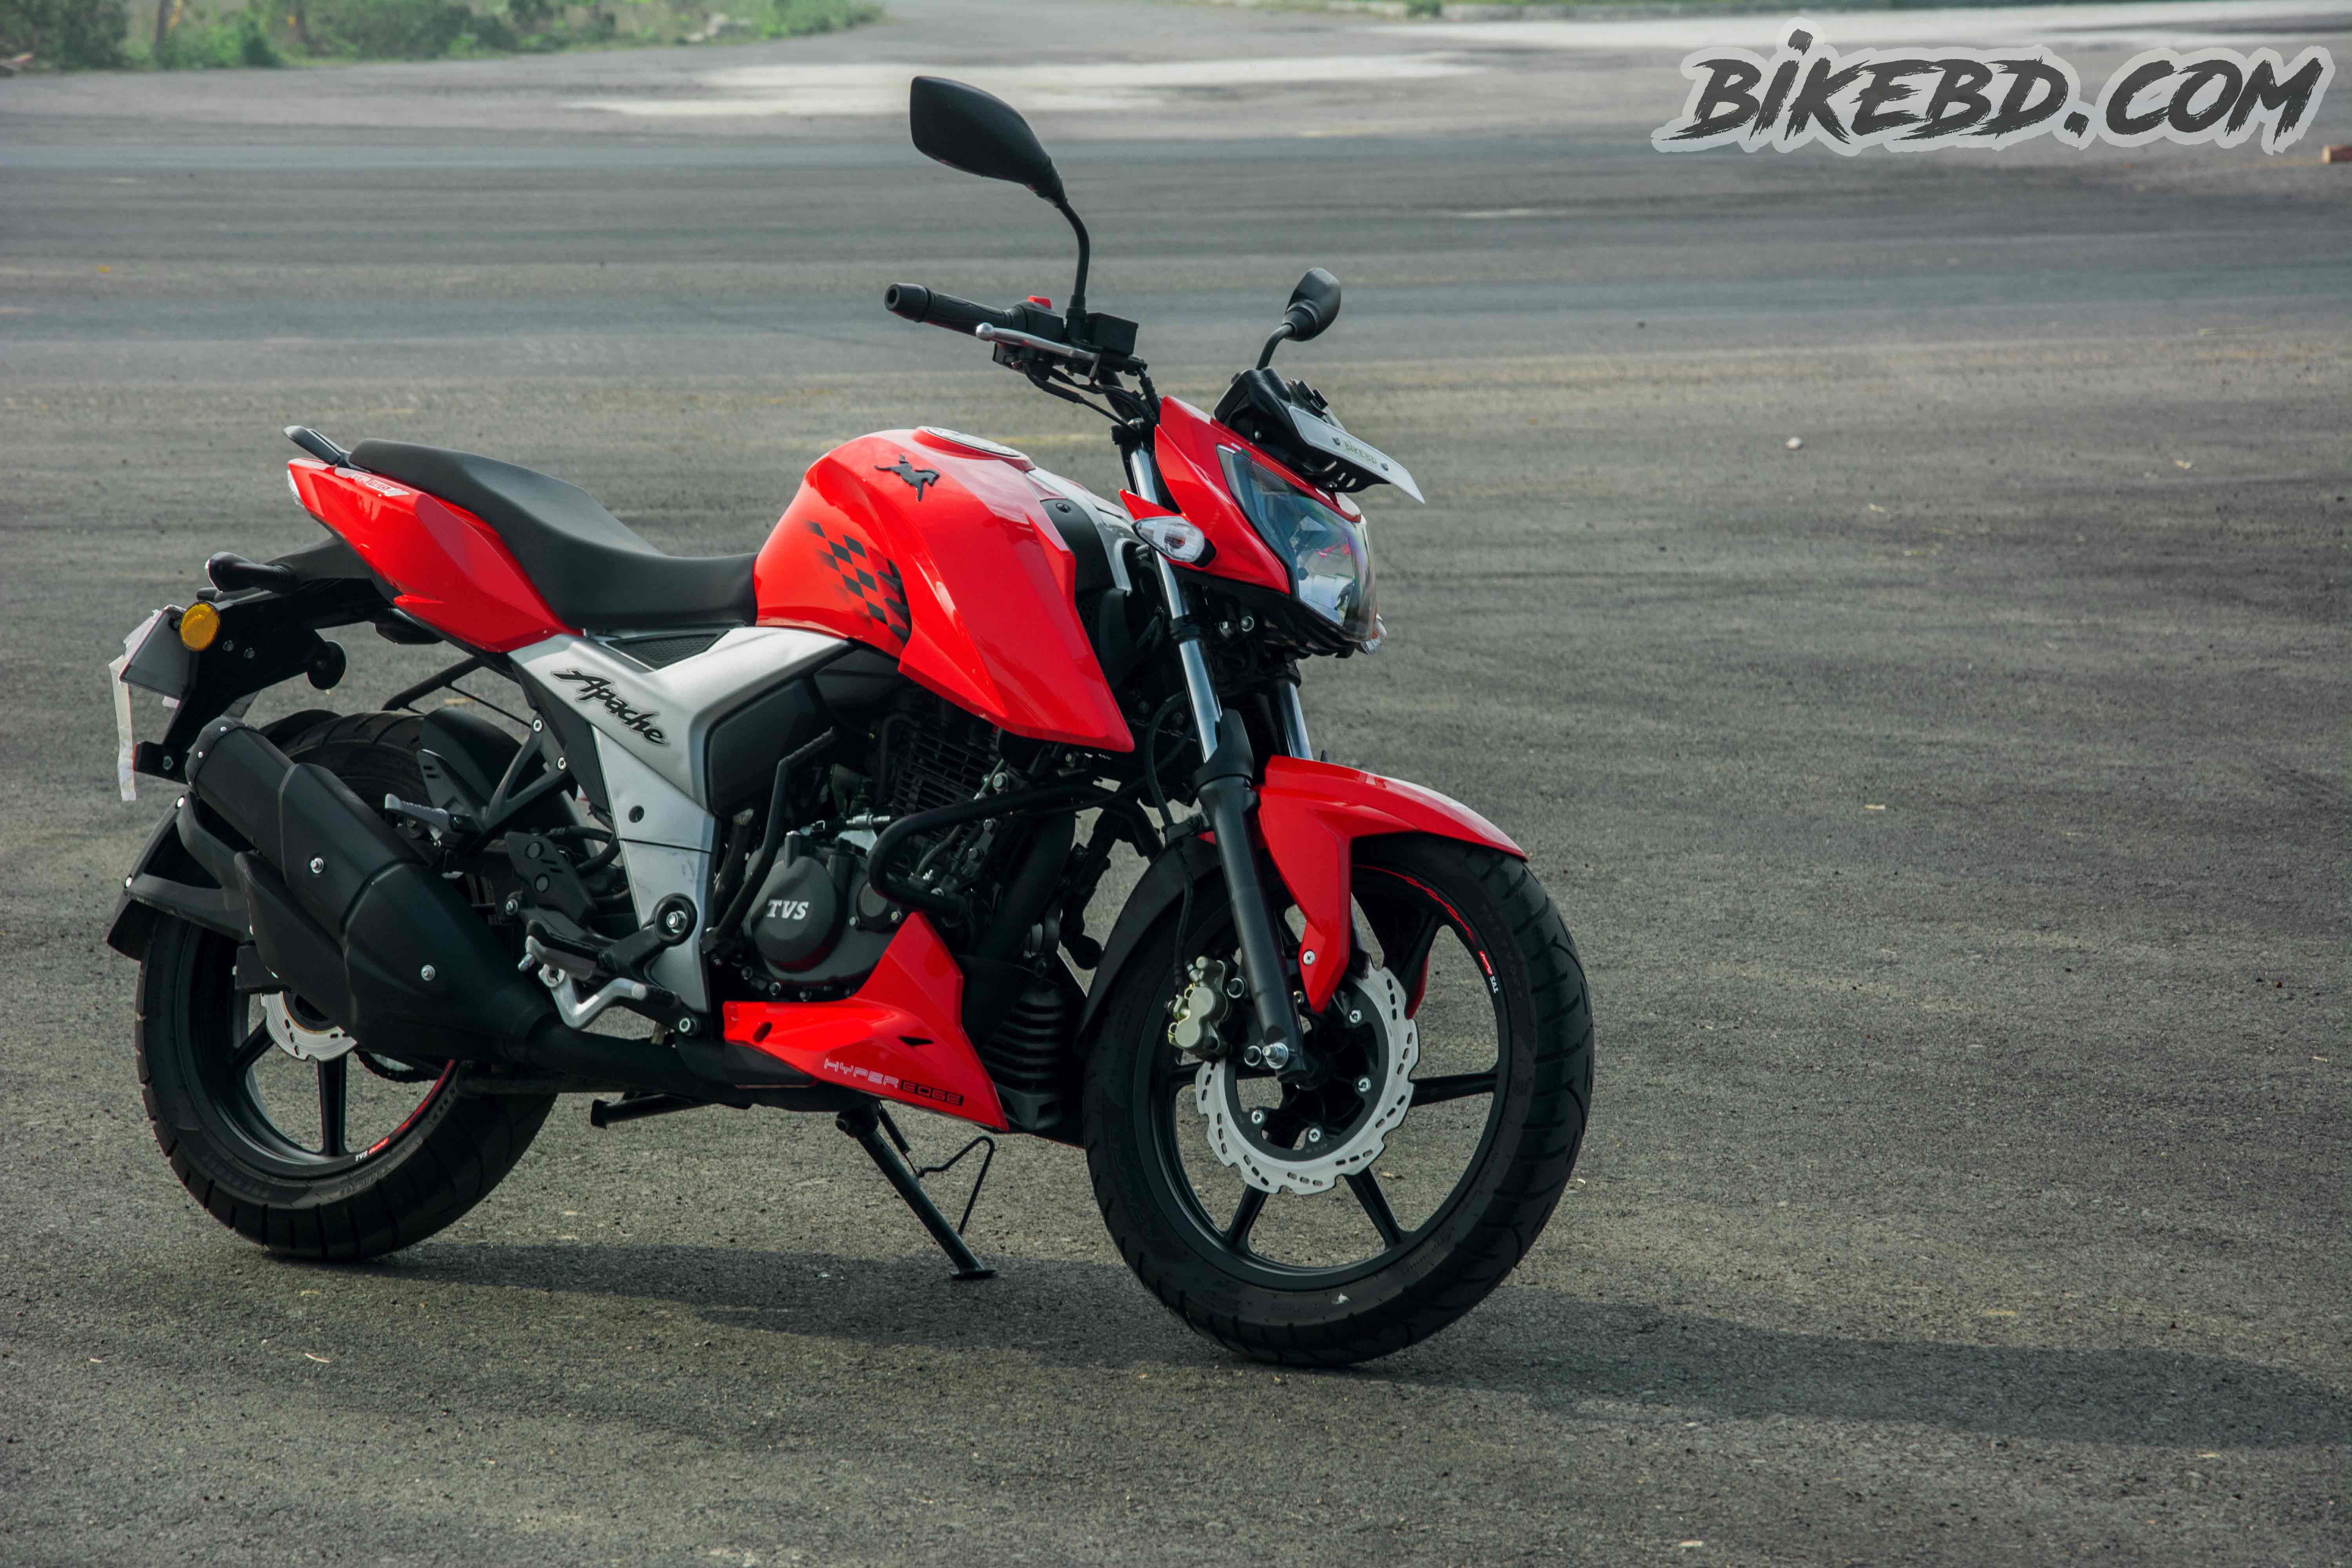 Apache Bike 160 Red Colour Bike S Collection And Info